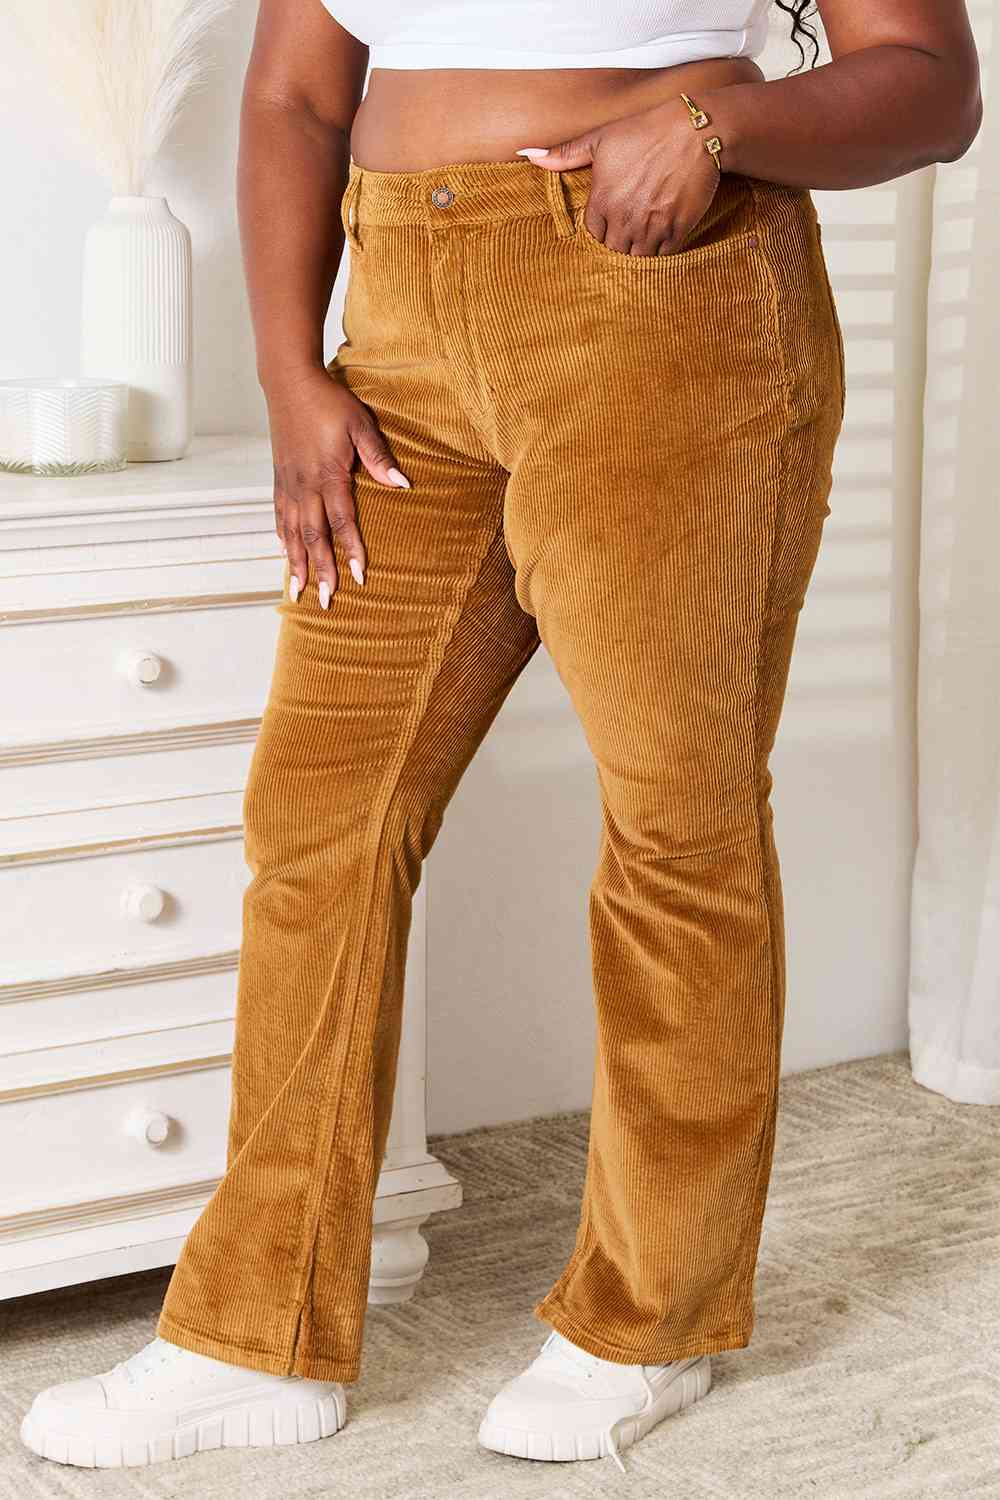 These pants feature a mid-rise waist that flatters your silhouette while providing a comfortable fit. The rich camel color is achieved through a unique overdyed process, ensuring a vibrant and lasting hue. The classic bootcut design adds a touch of timeless elegance, making these pants versatile for both casual and semi-formal occasions.   